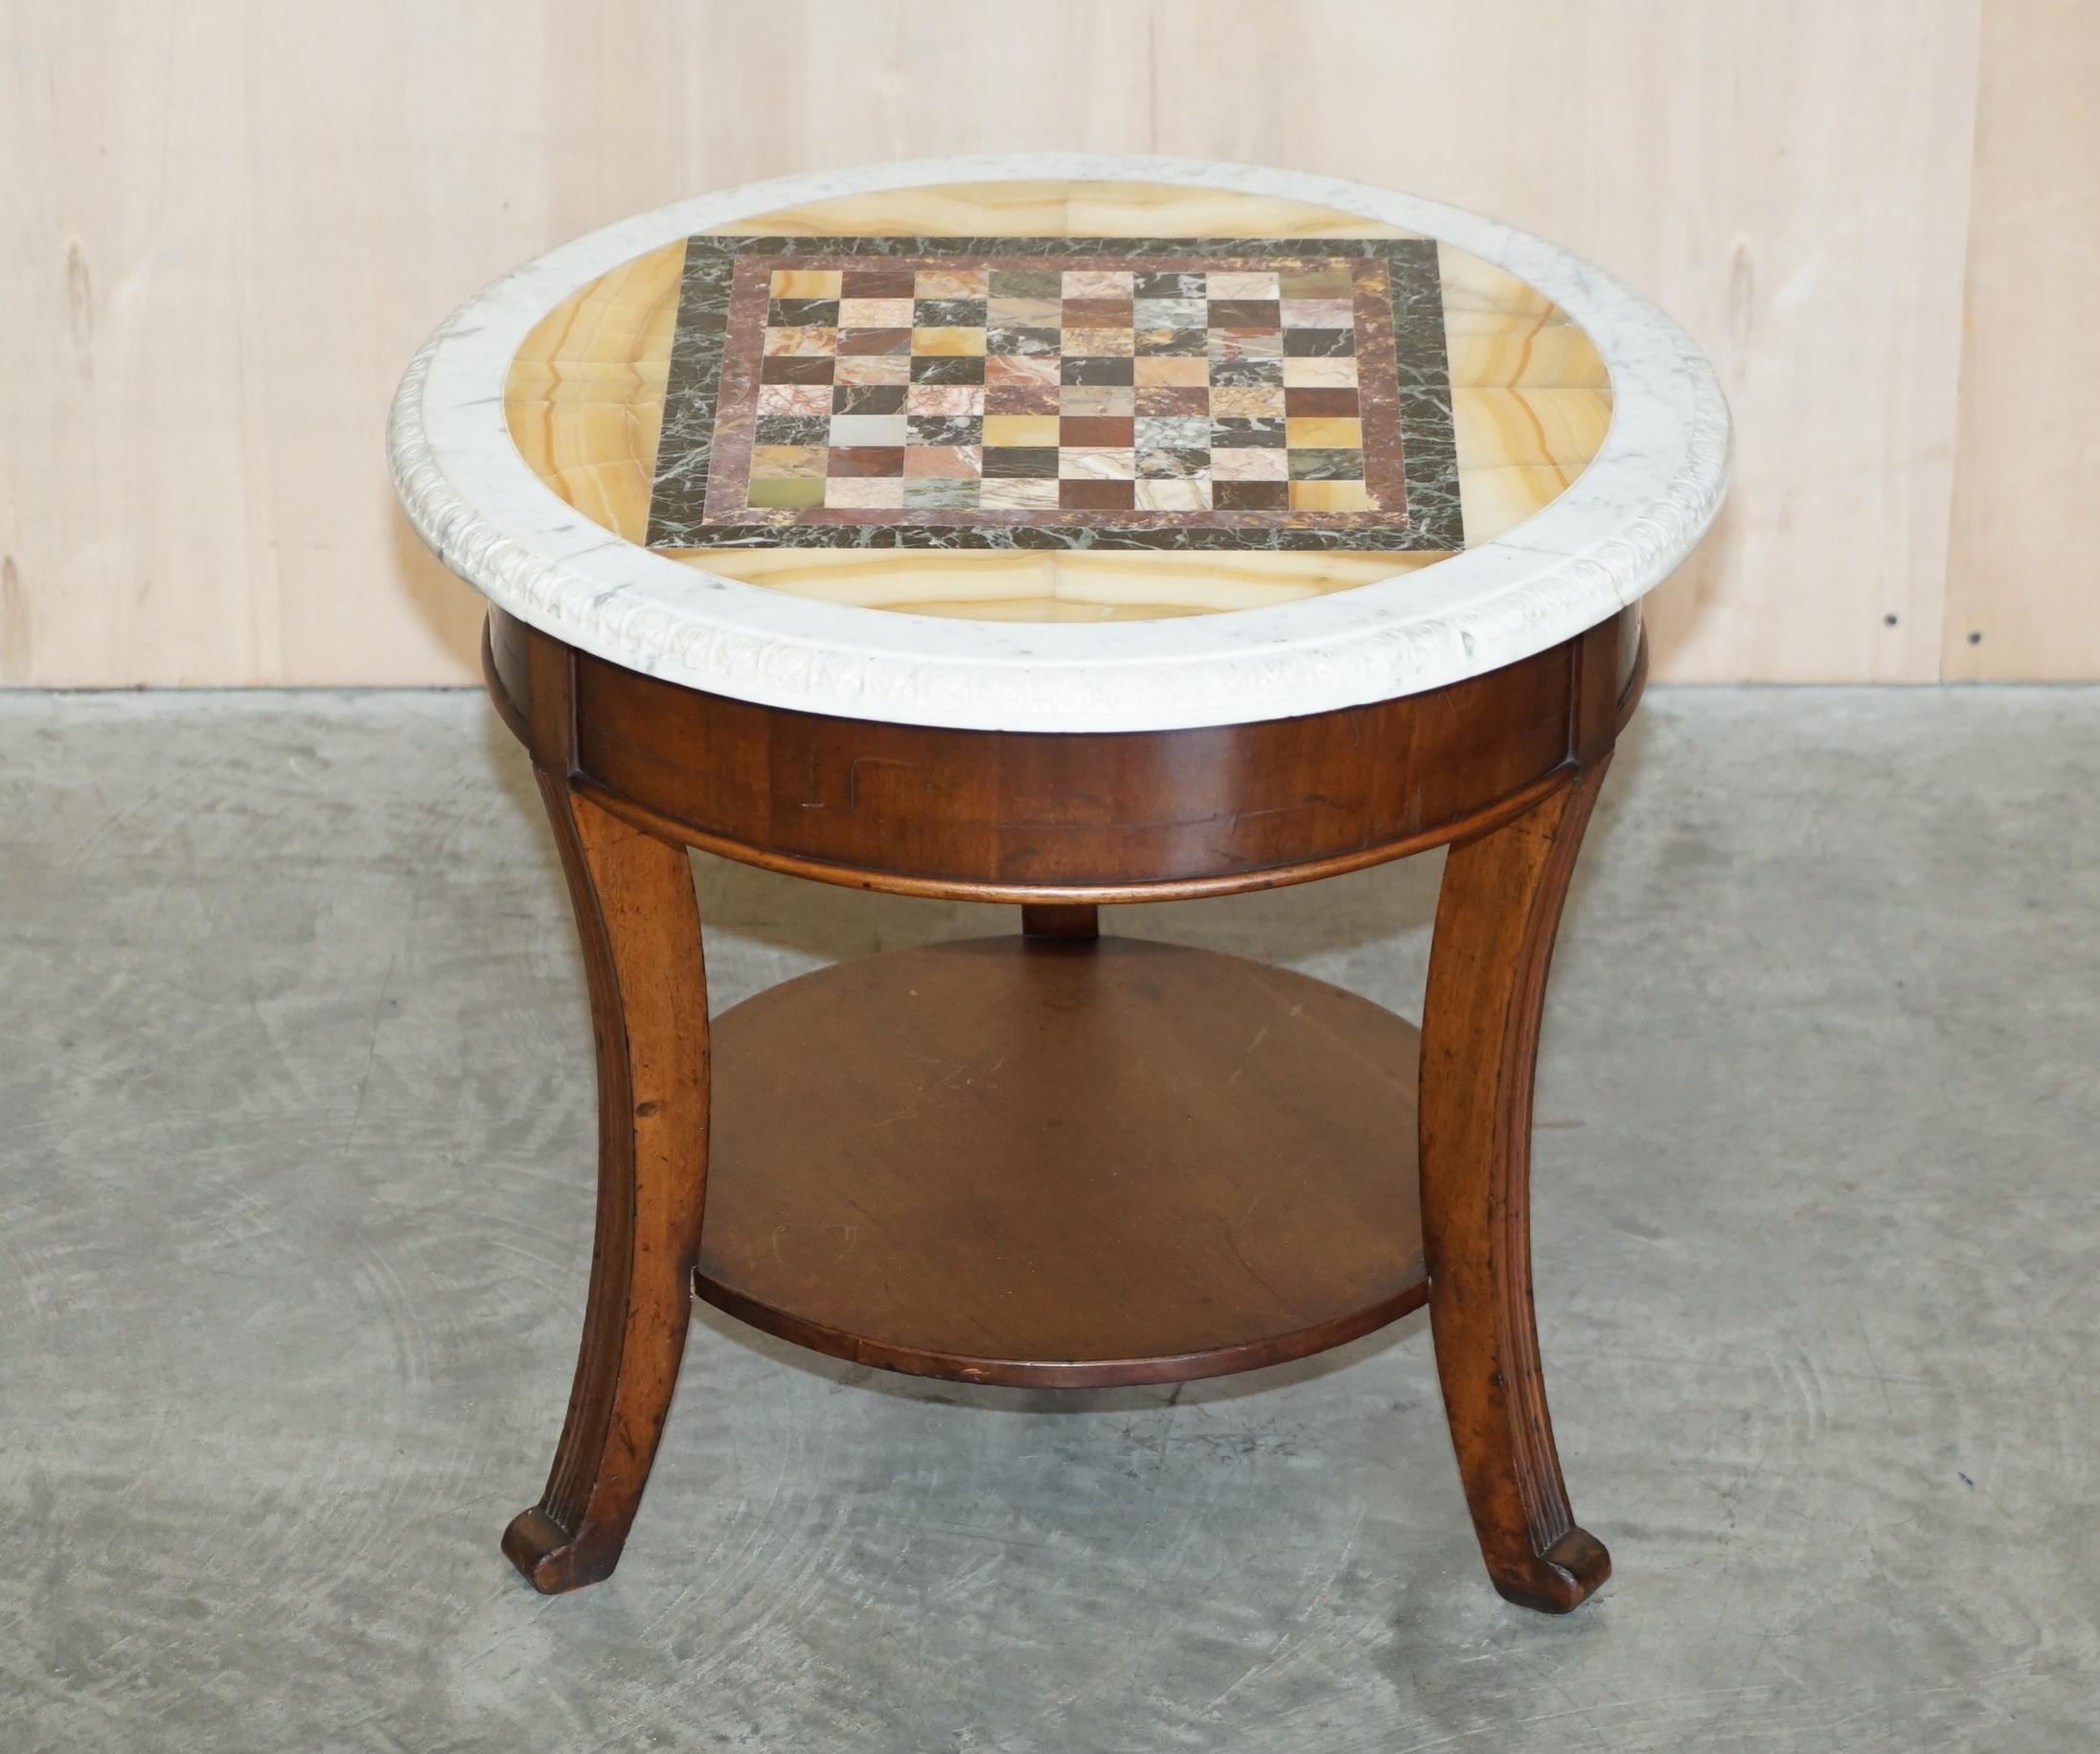 We are delighted to offer for sale this absolutely exquisite antique Pietra Dura Italian Marble chess table with Victorian Mahogany circa 1880 base 

This is one of the most exceptional chess tables I have ever seen, the top is circa 1880, Italian